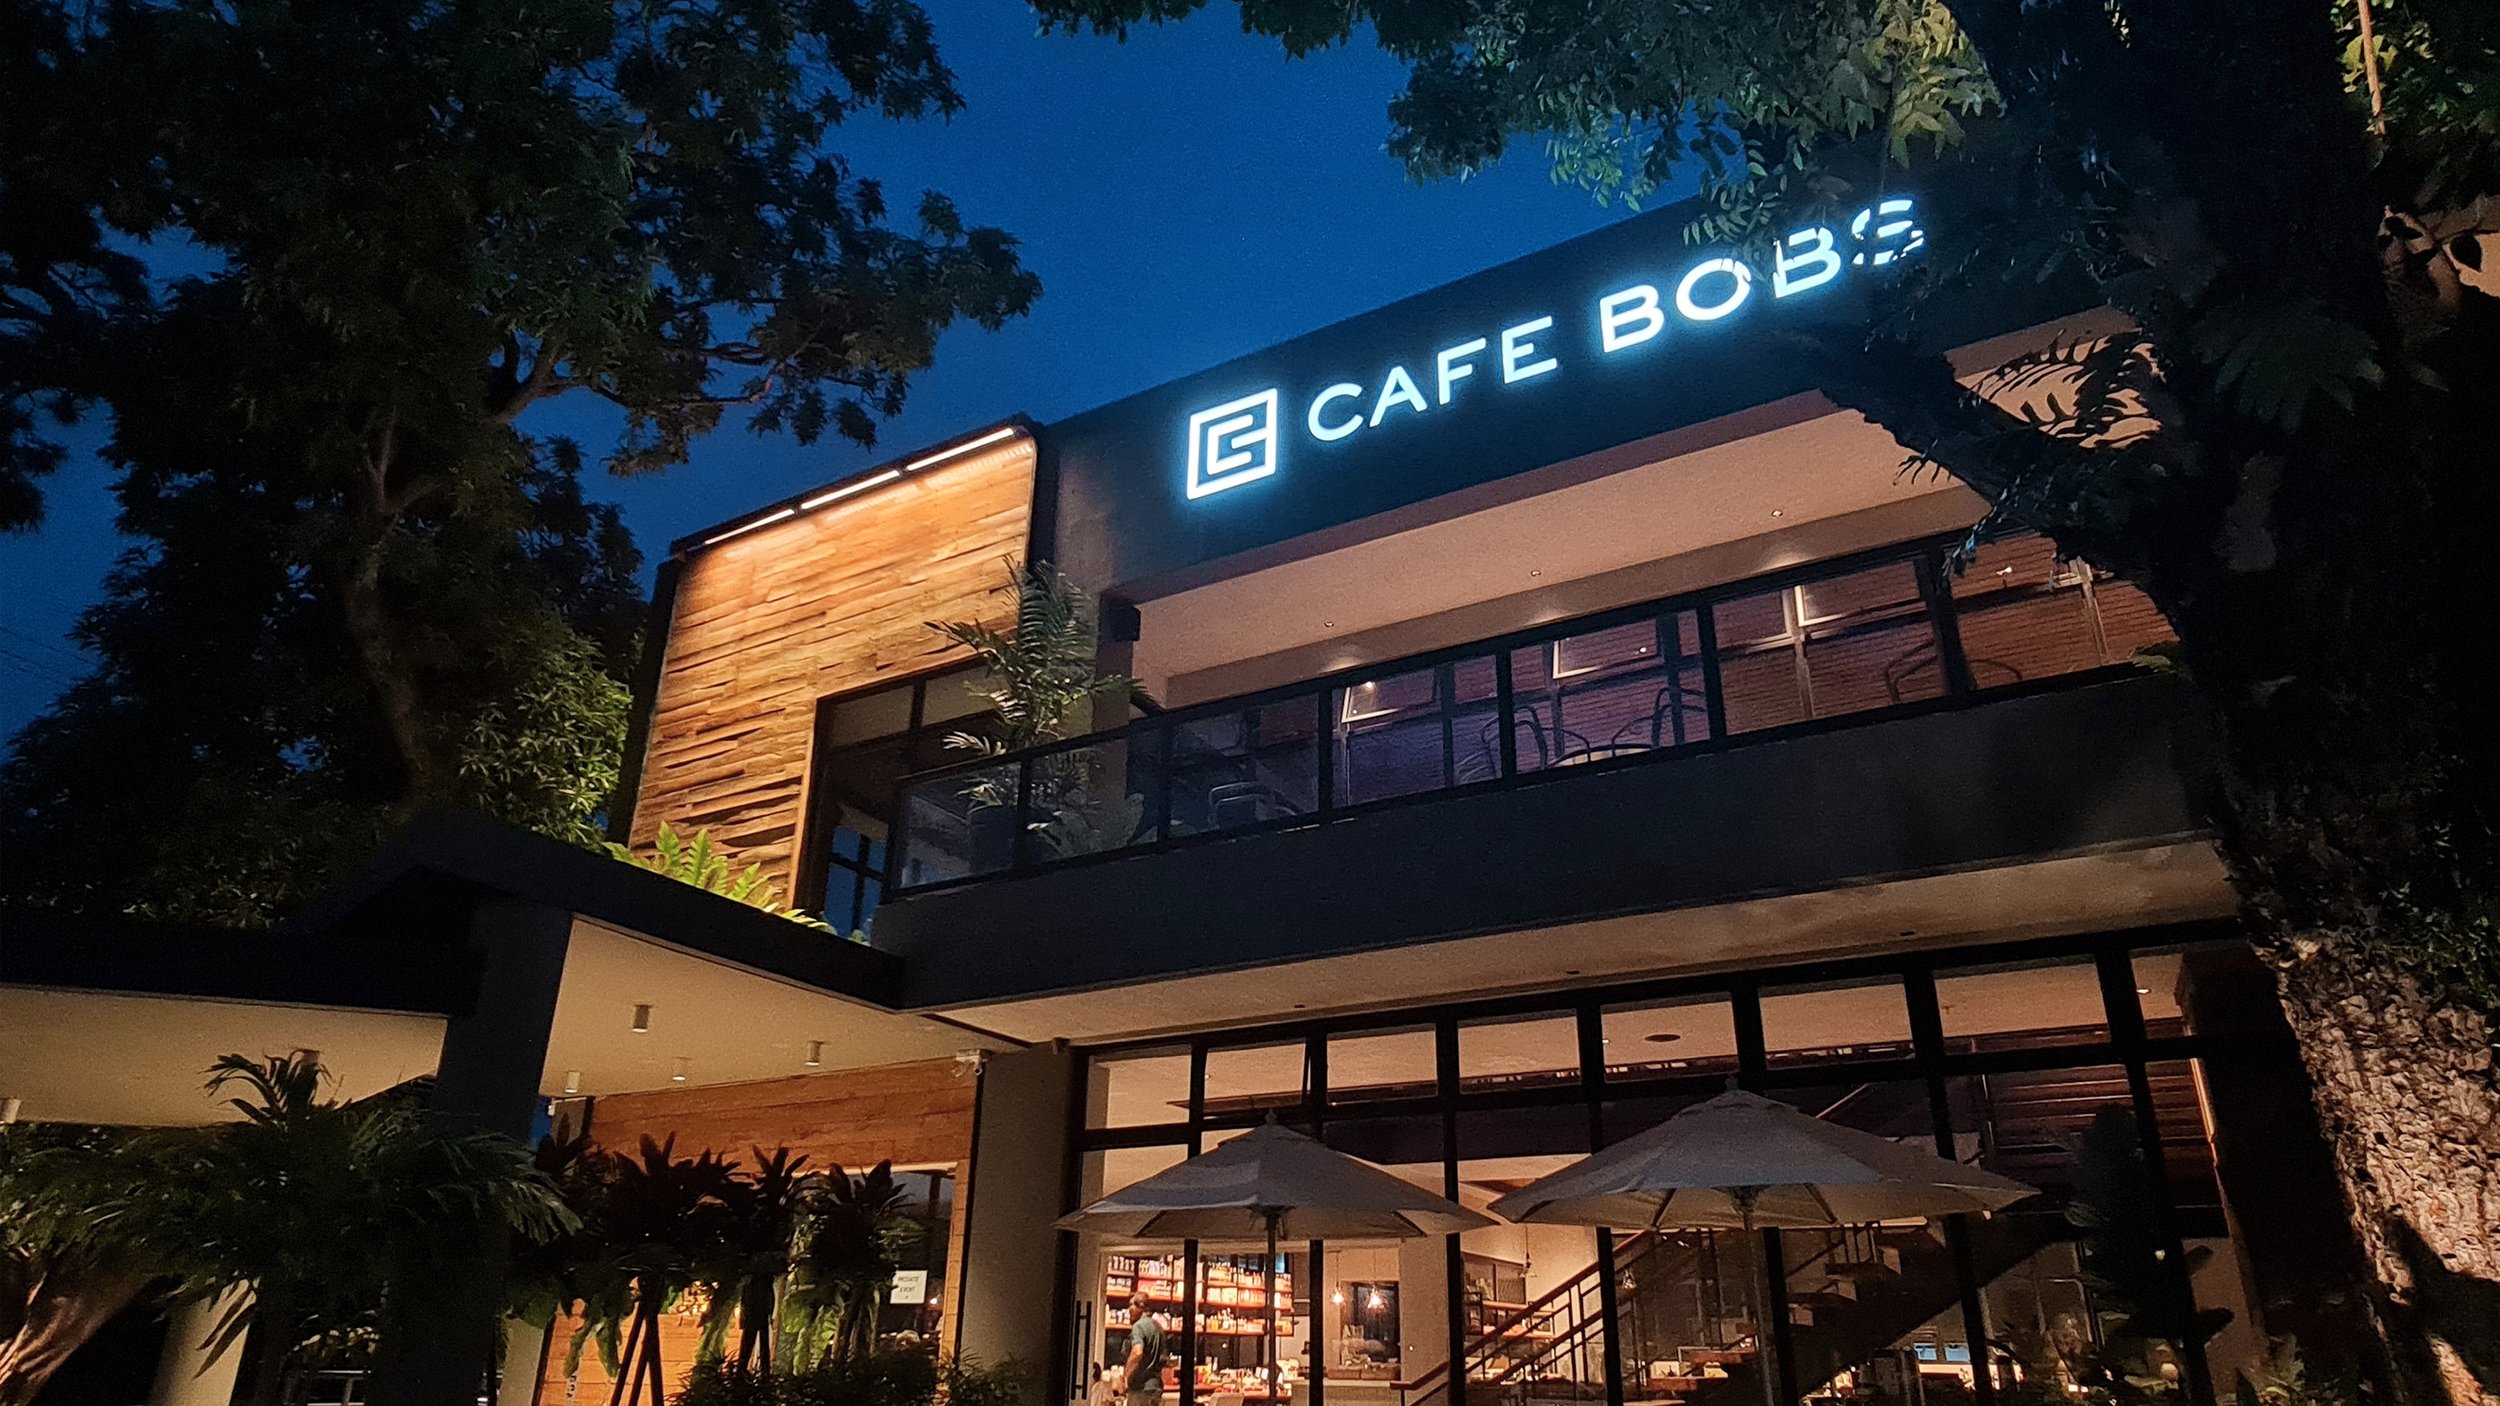 Brand Identity for Cafe Bobs Flagship